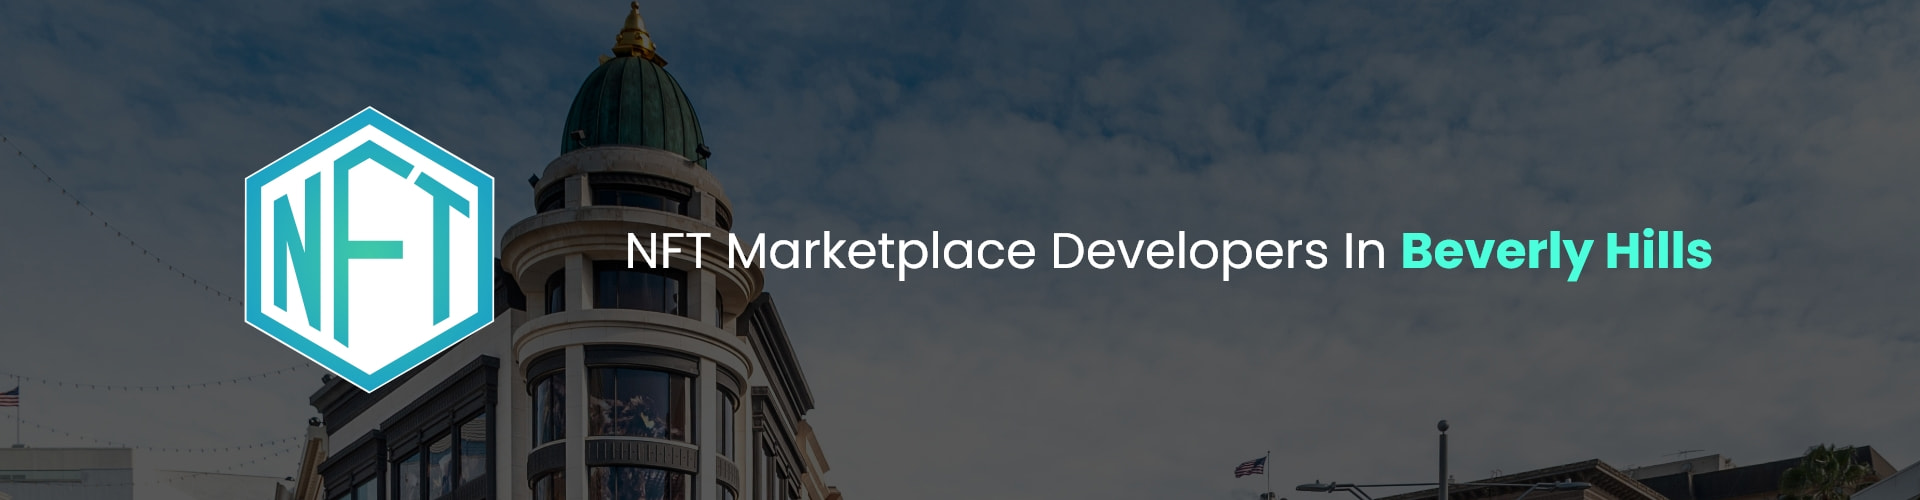 hire nft marketplace developers in beverly hills